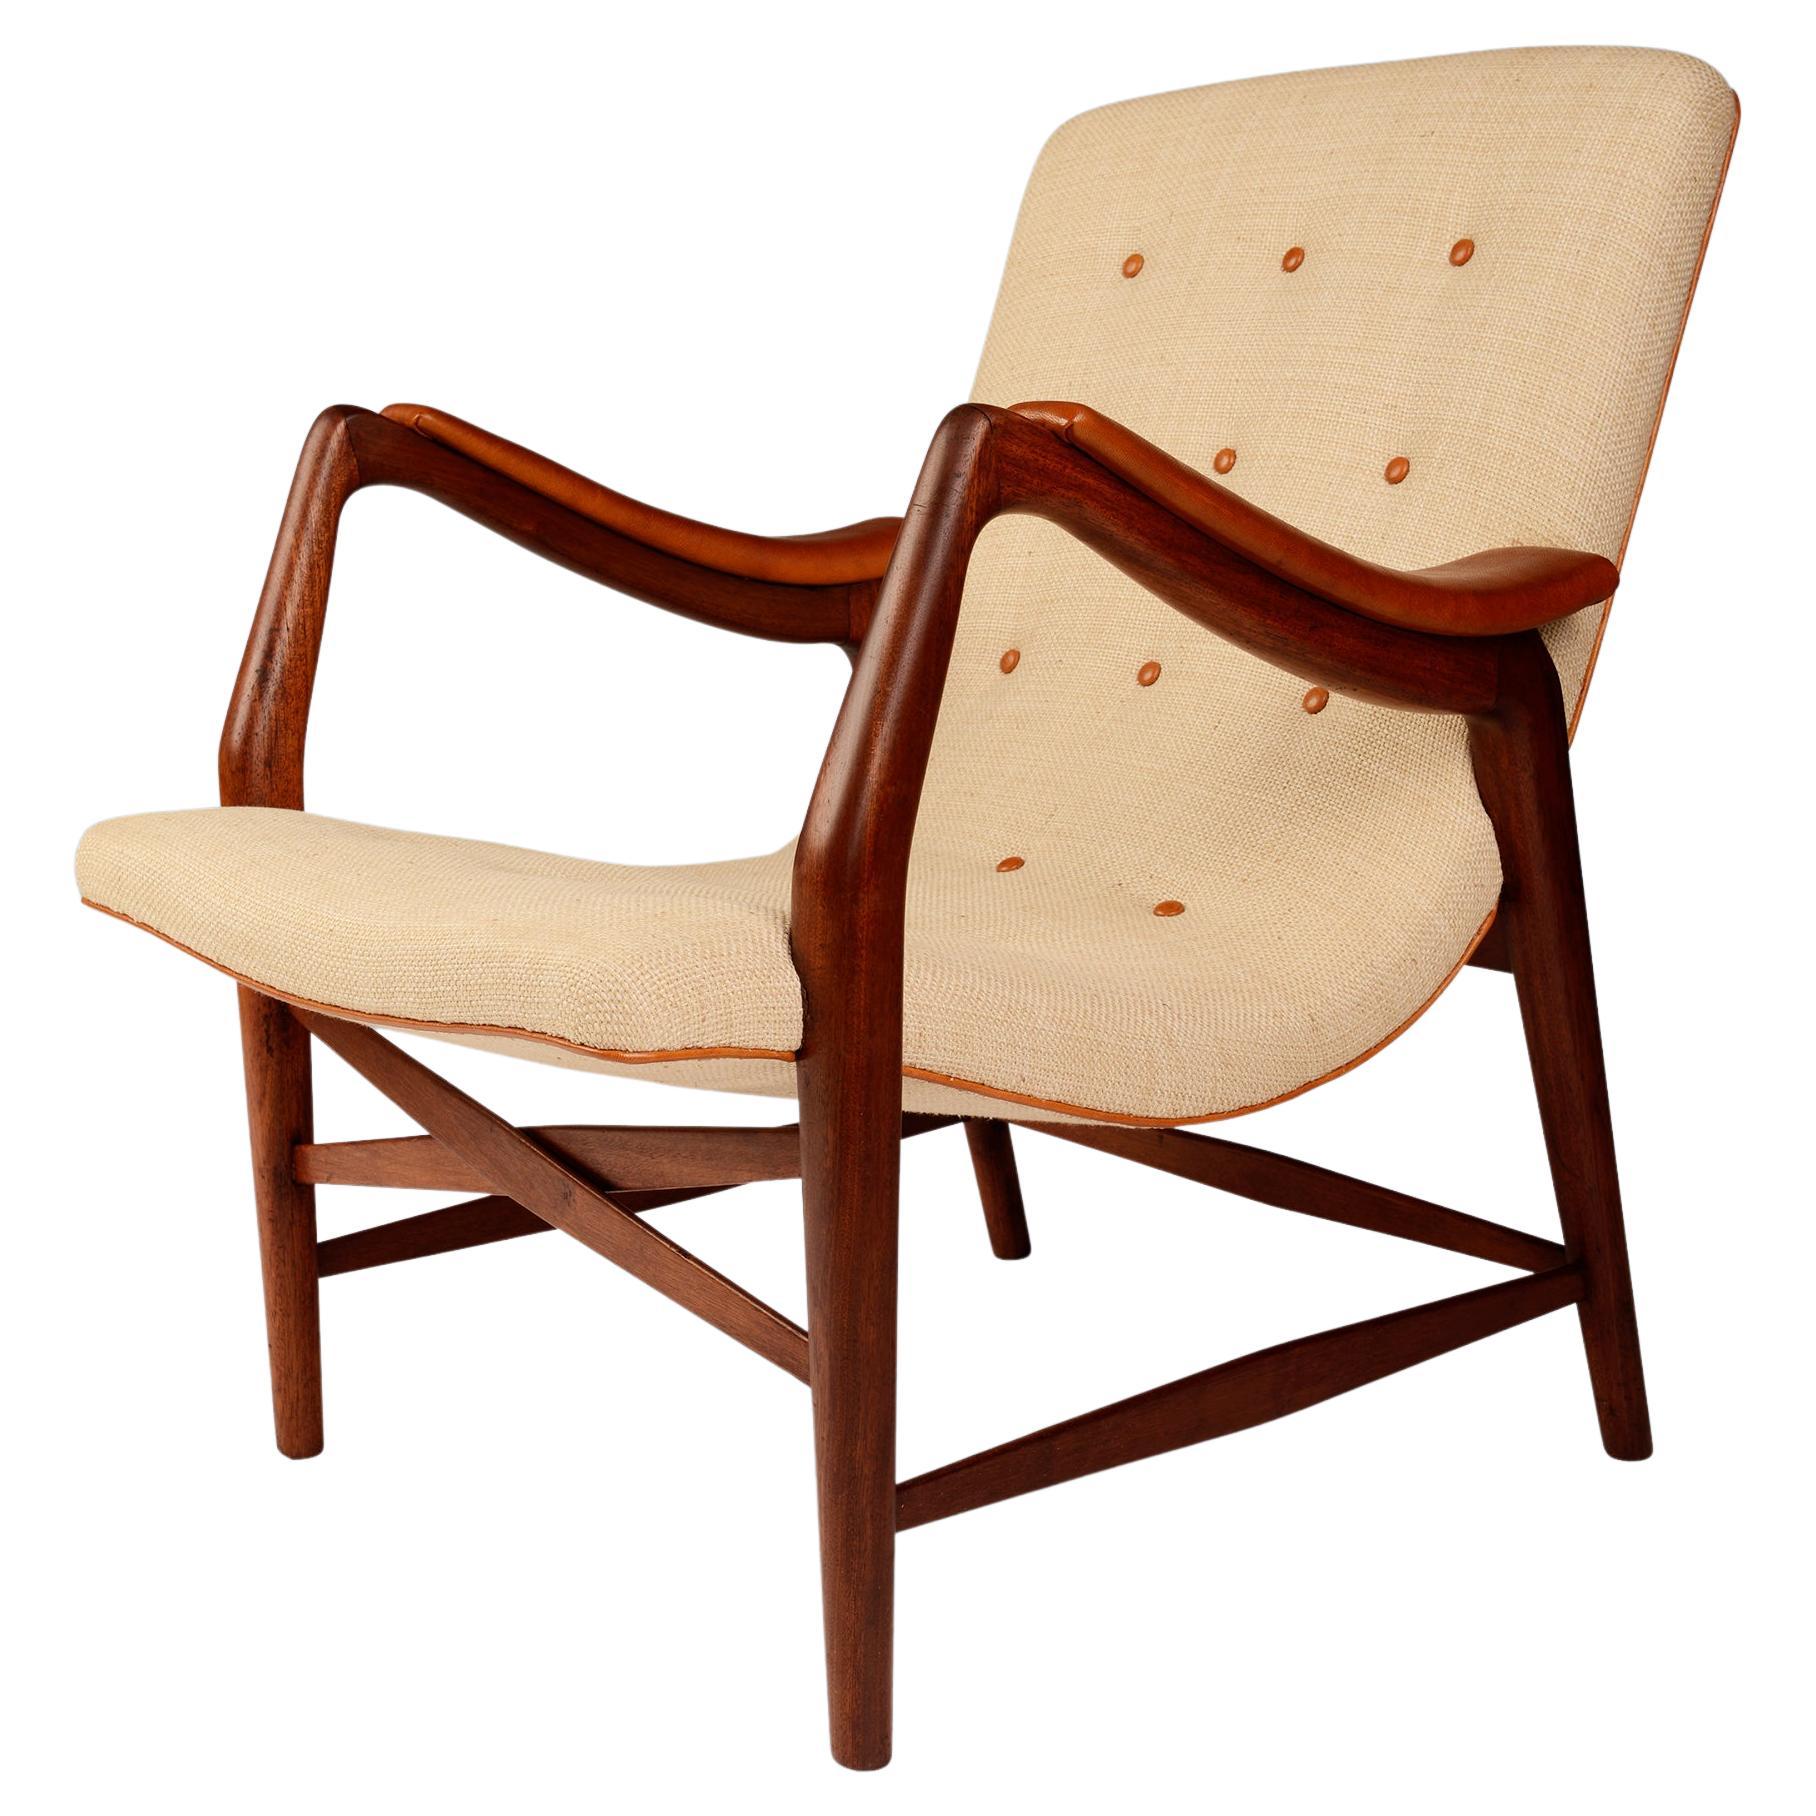 Teak chair with curvy seat upholstered with light fabric and leather details For Sale